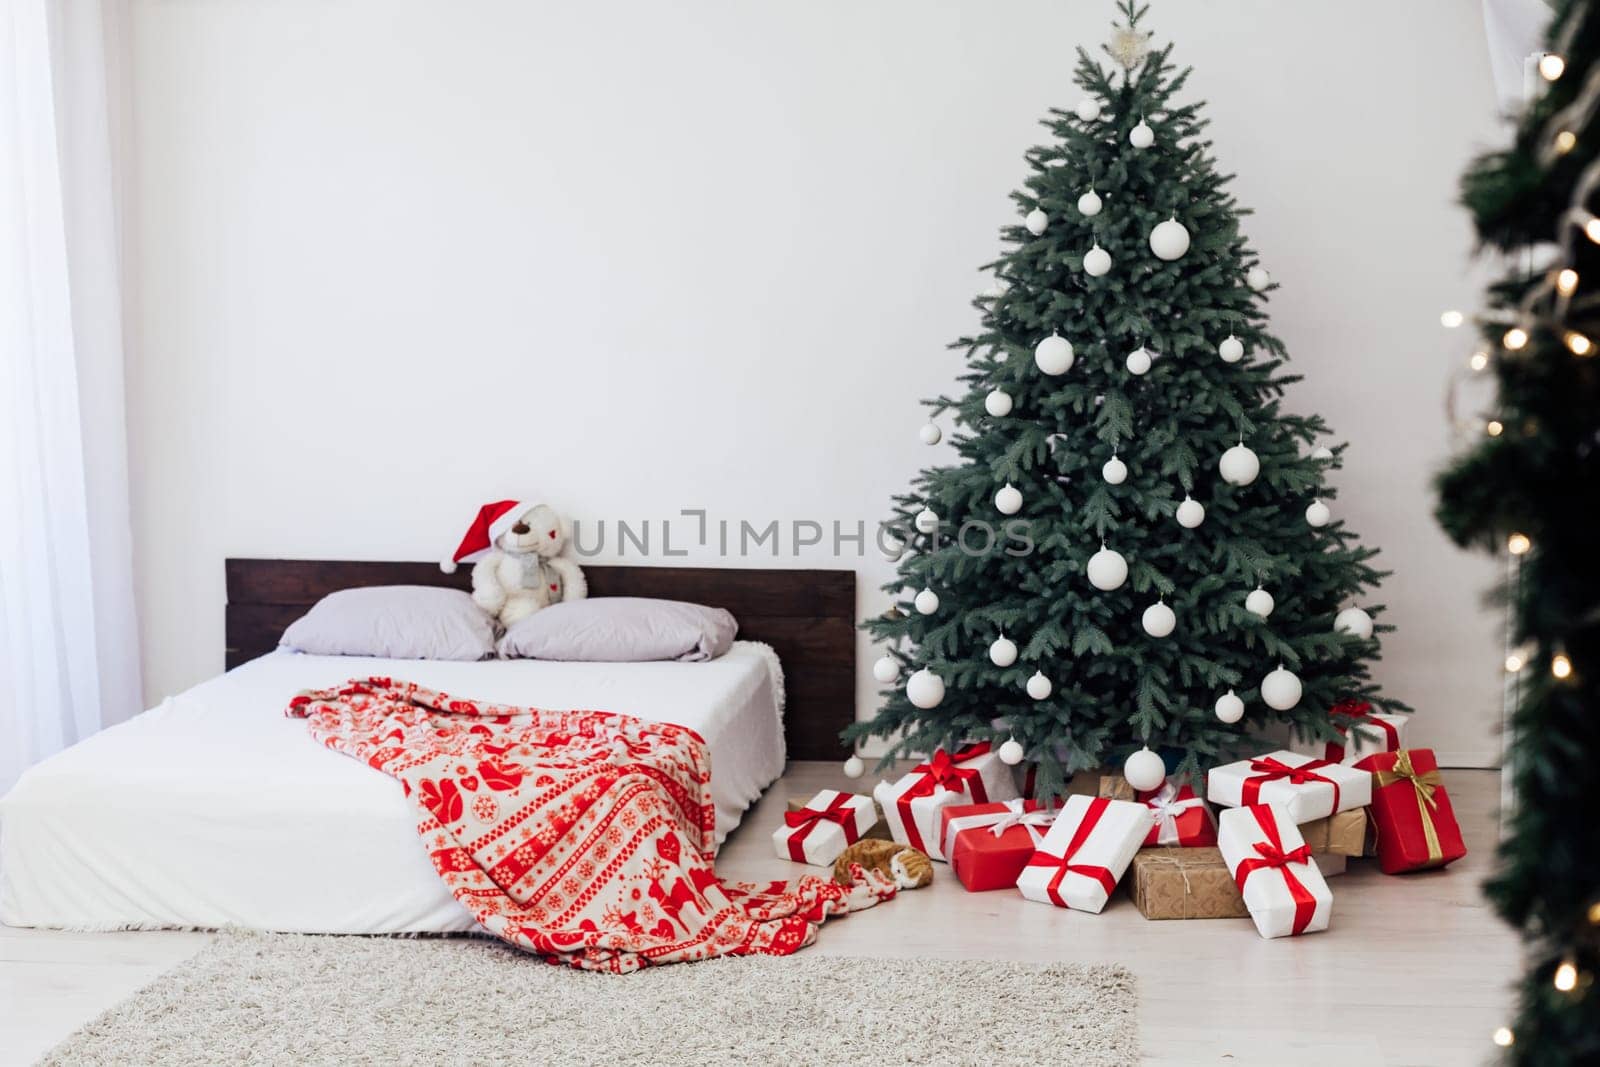 New year bedroom decor with Christmas tree bed with gifts and garlands interior by Simakov